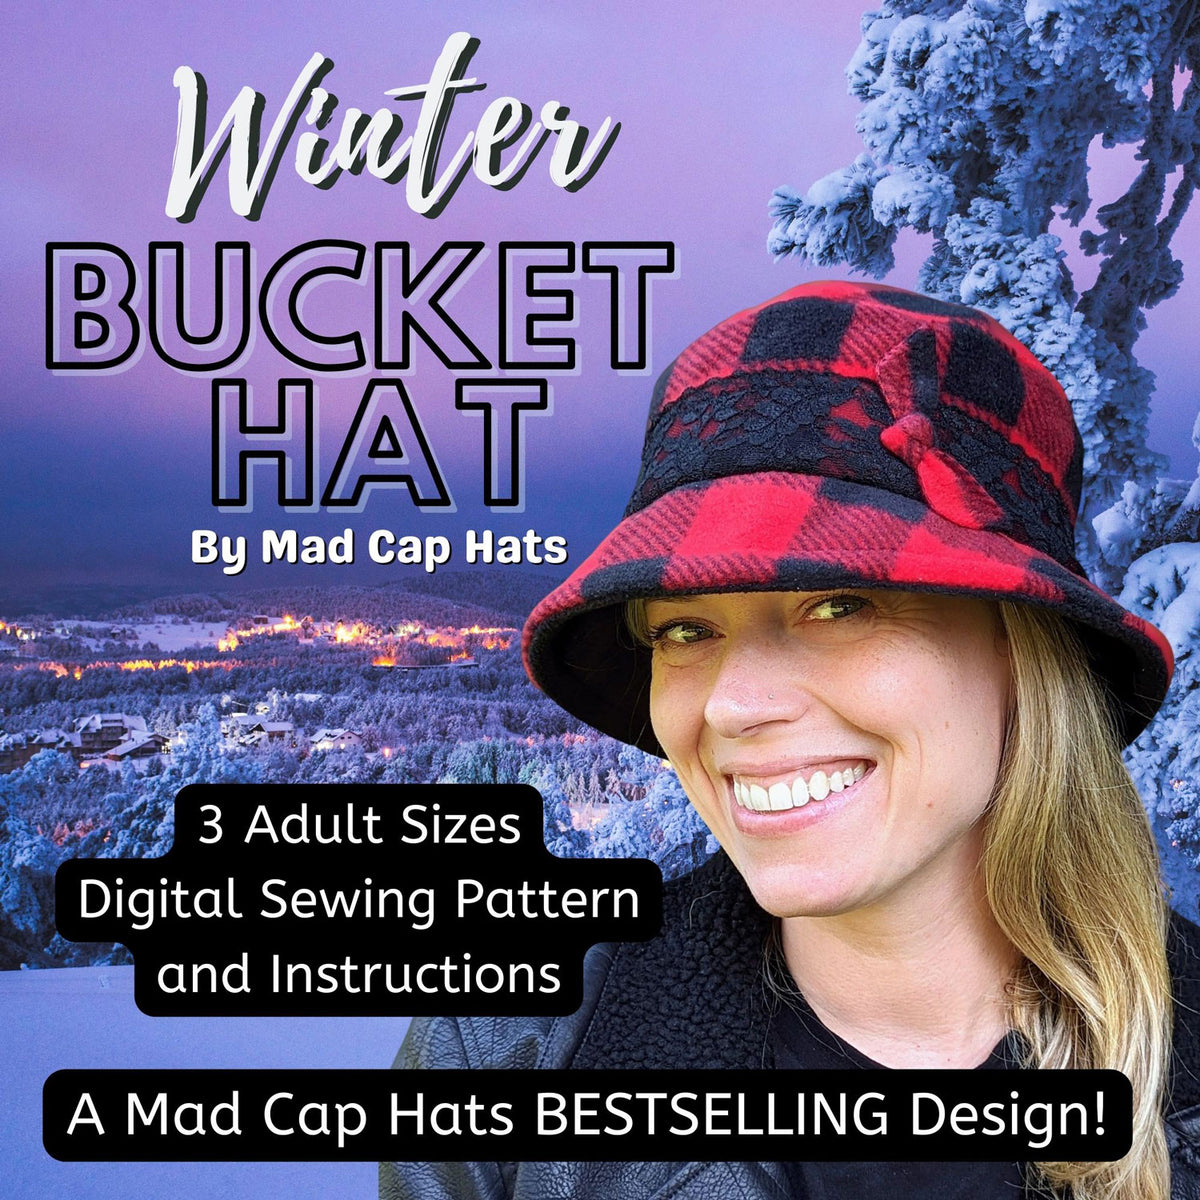 Winter Bucket Hat sewing pattern and instructions, digital format